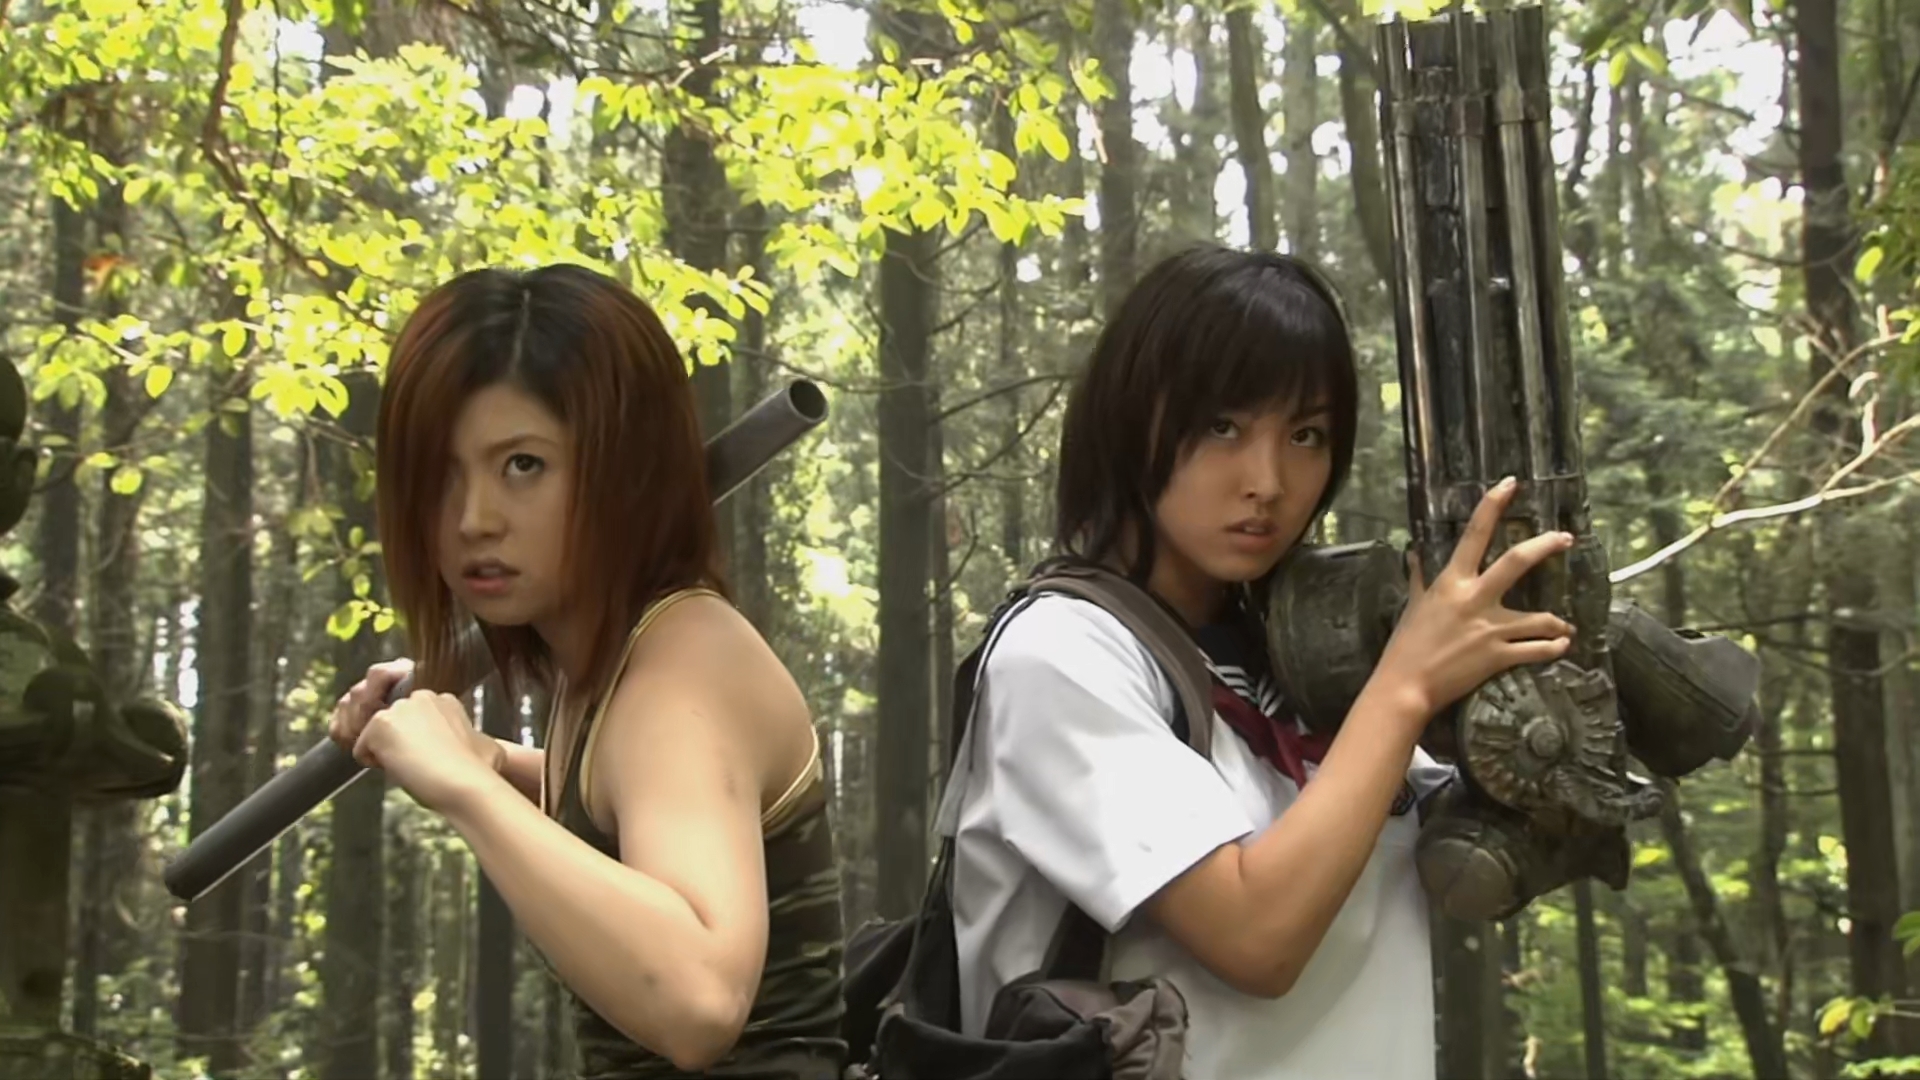 Forest Japanese Characters Women With Weapons 1920x1080